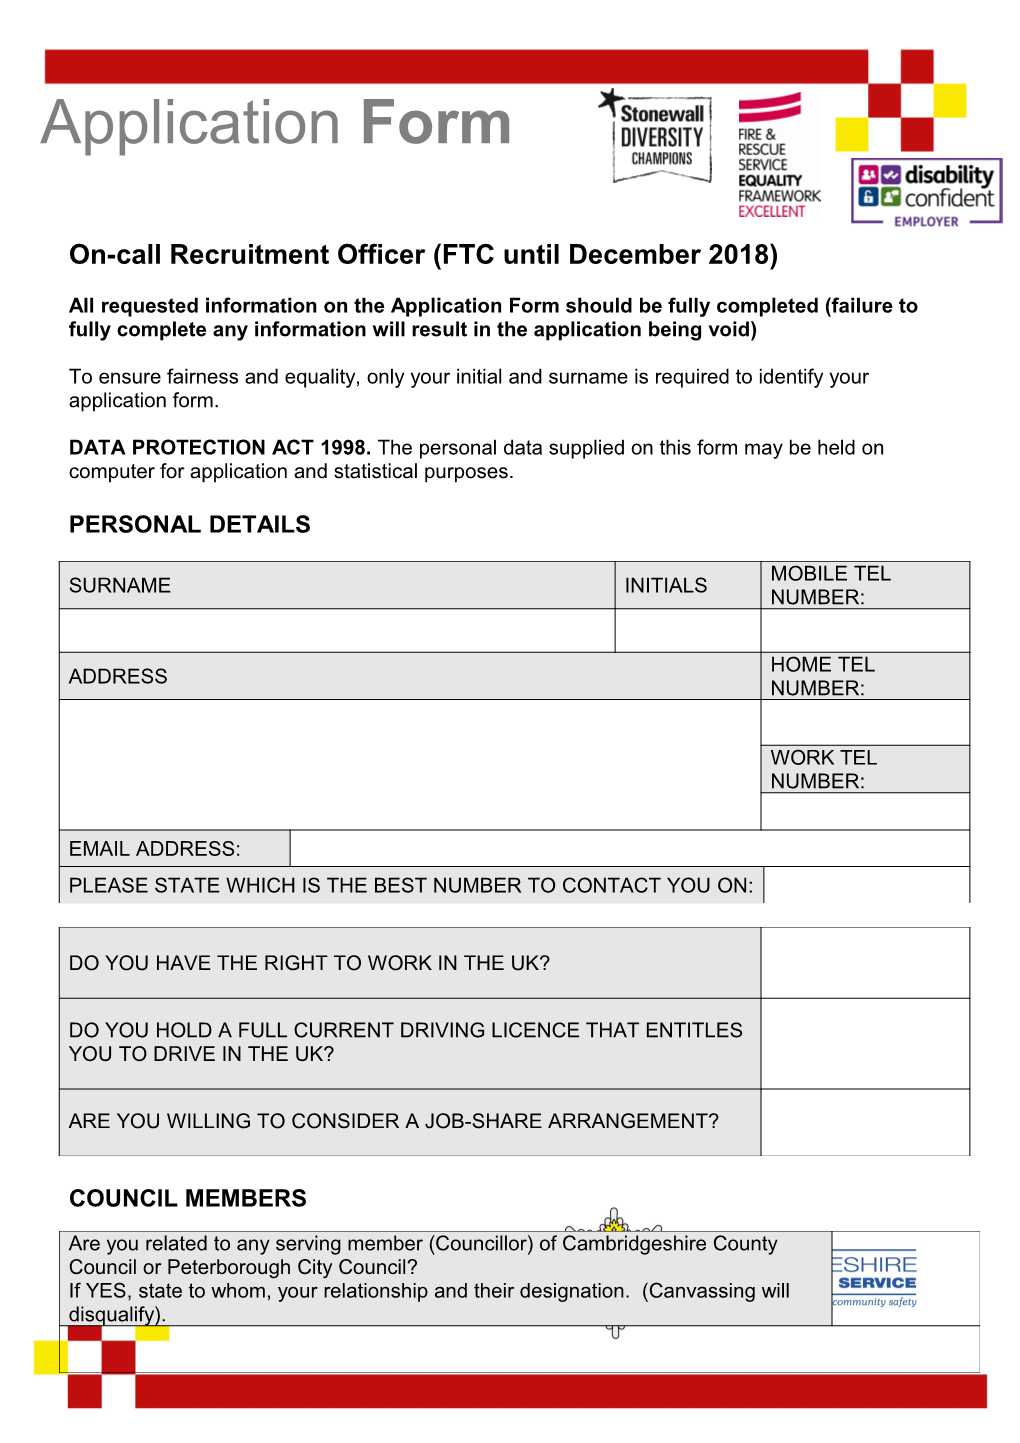 On-Call Recruitment Officer (FTC Until December 2018)